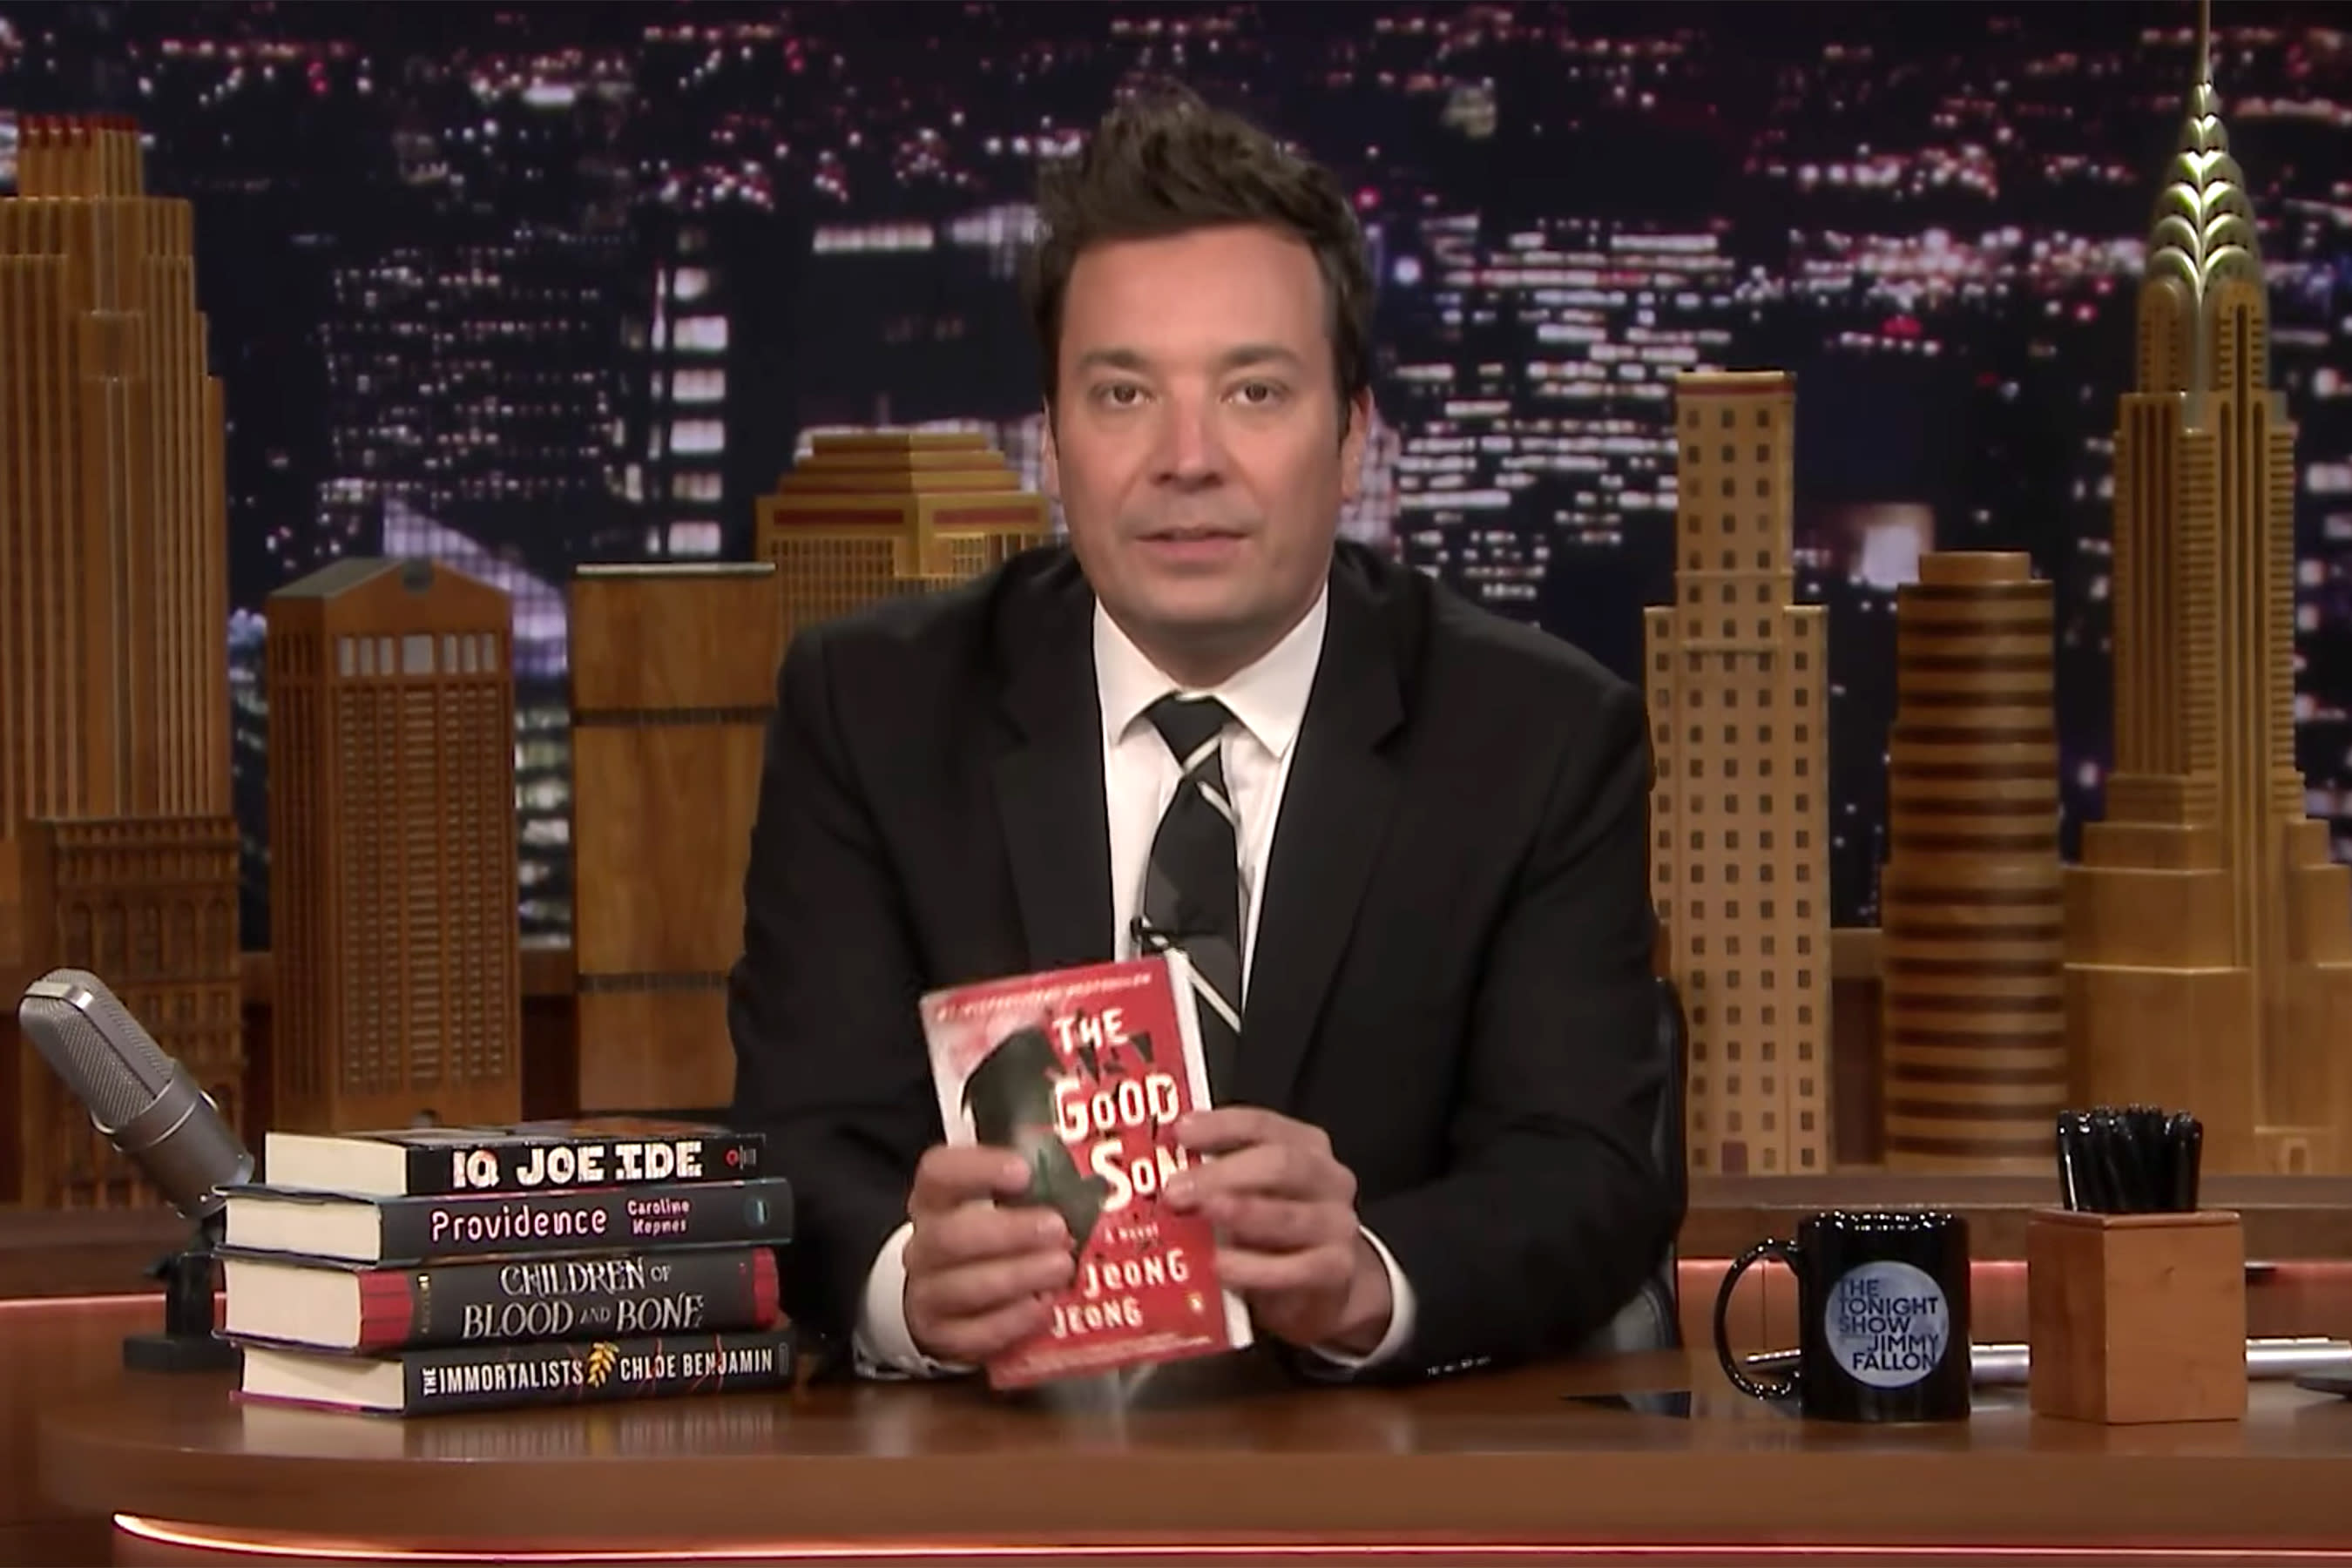 Jimmy Fallon Starts His Very Own Summer Book Club and We're All